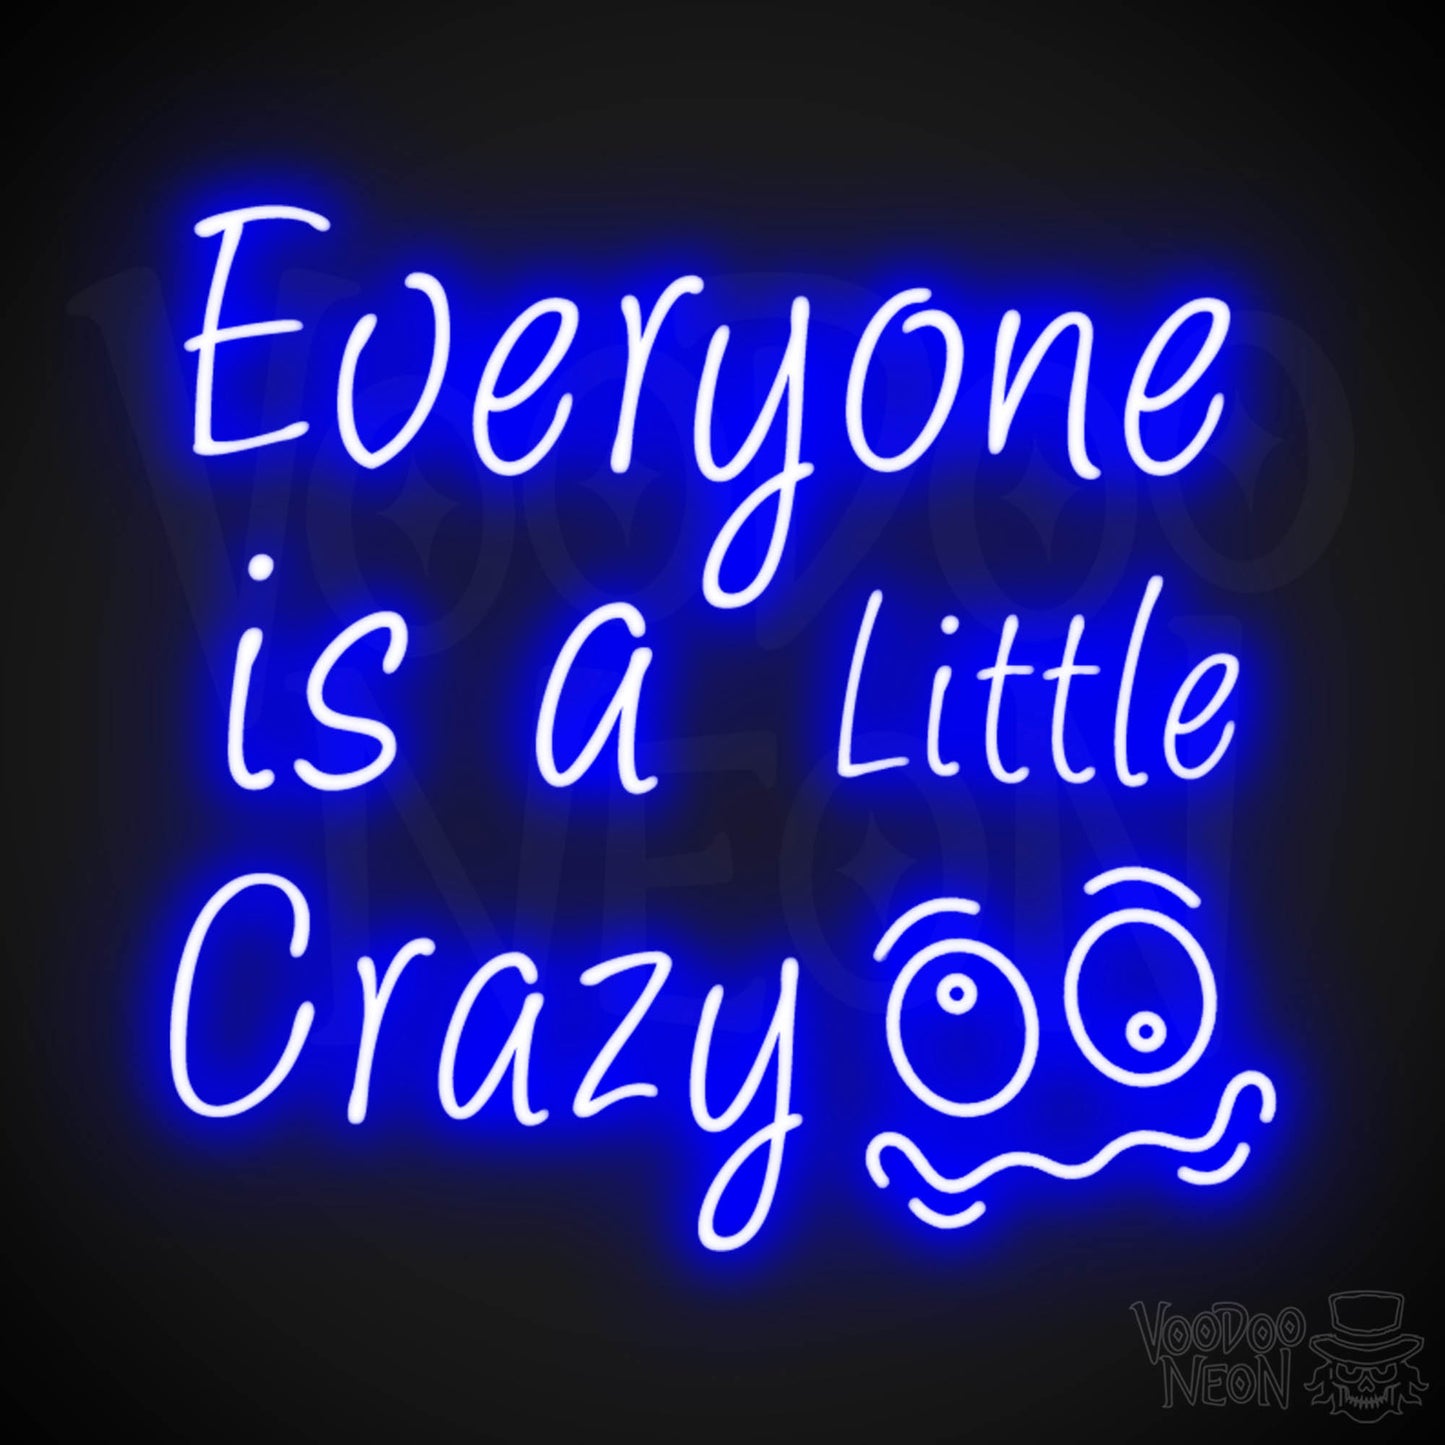 Everyone Is A Little Crazy Neon Sign - Neon Everyone Is A Little Crazy Sign - Color Dark Blue